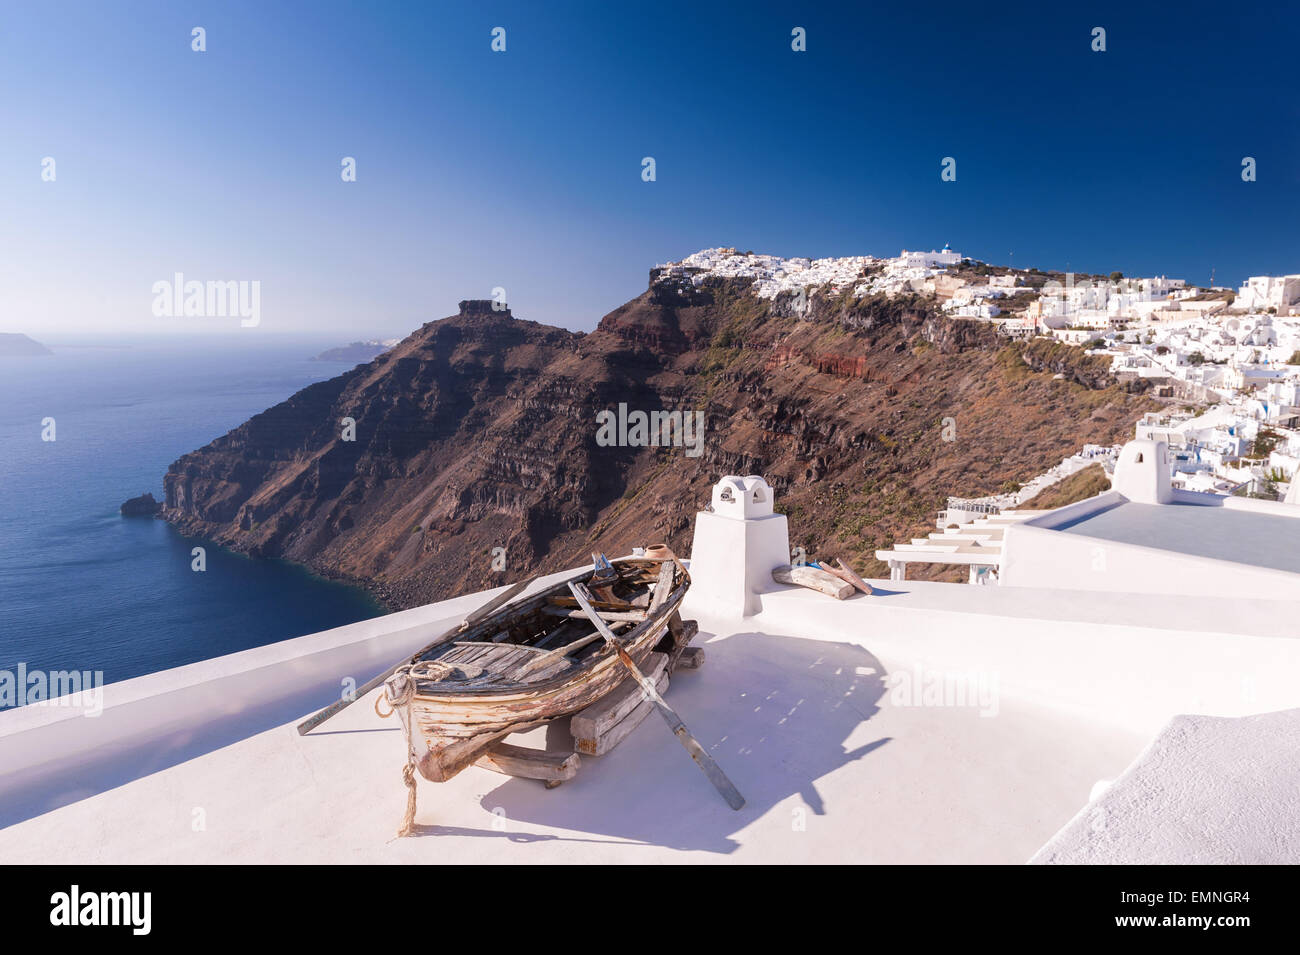 Old wooden rowing boat placed on a roof of one of houses in Fira, Santorini island, Greece Stock Photo